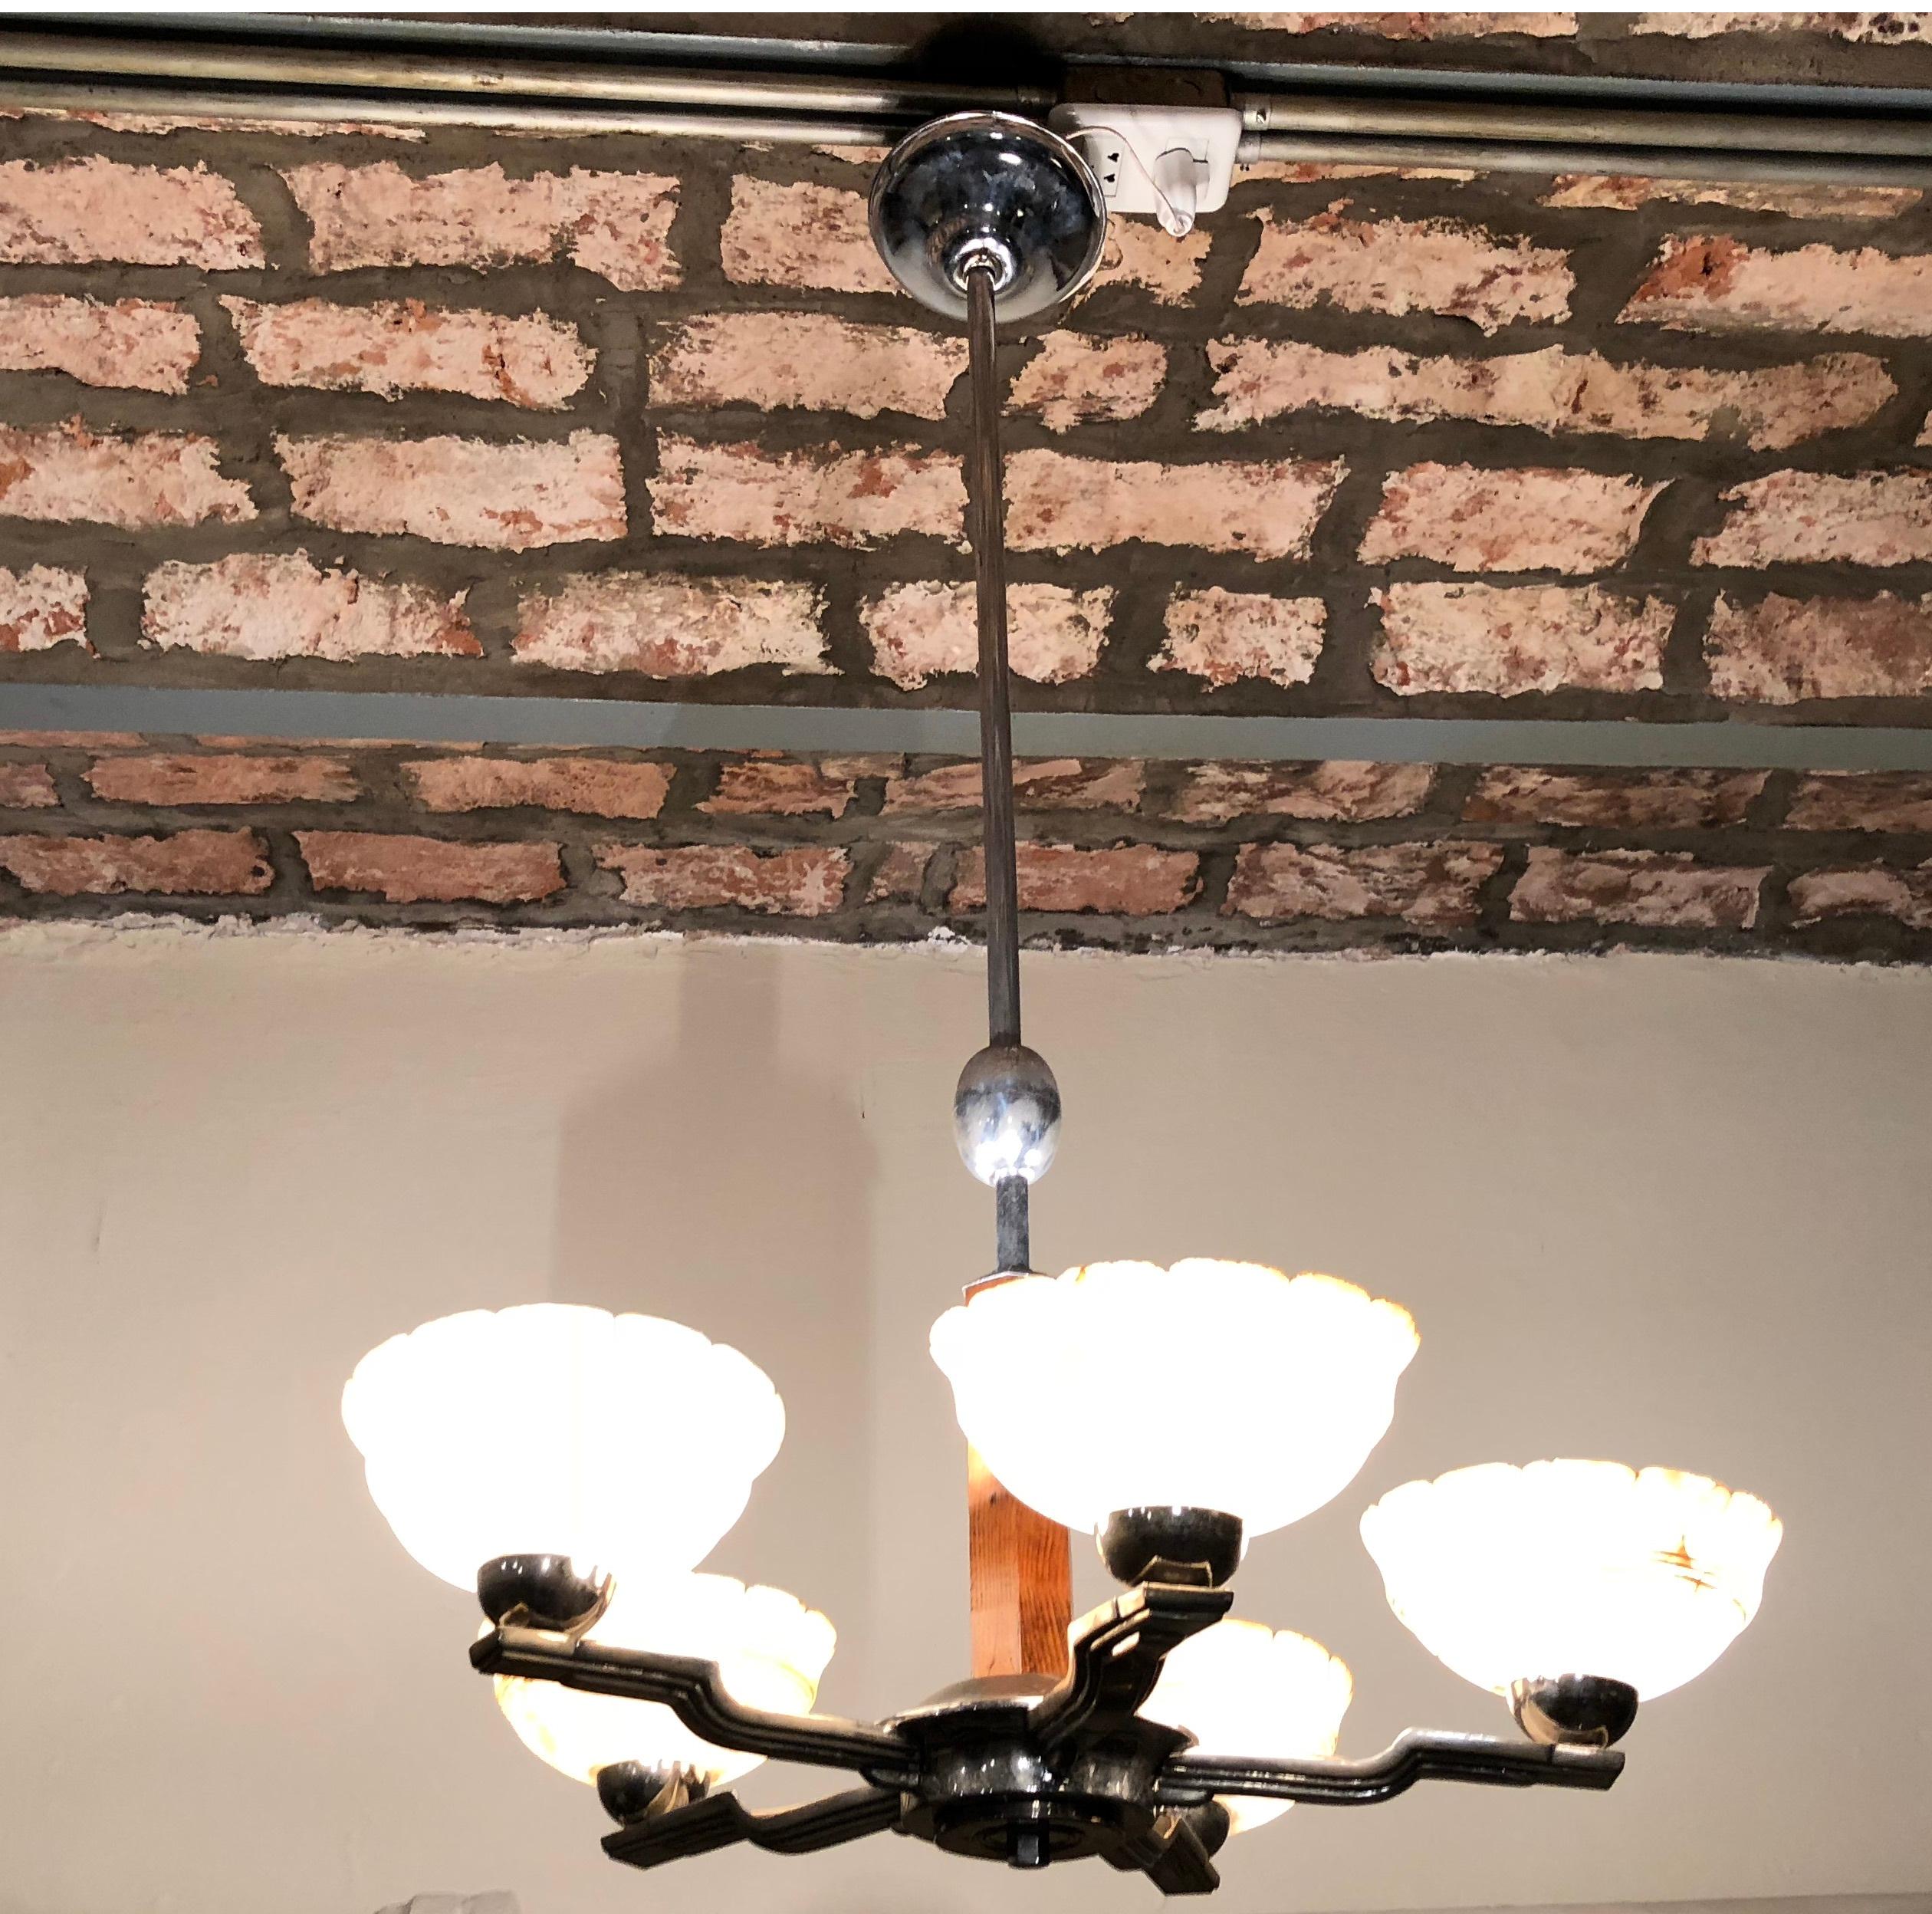 Amazing chandelier Art Deco (alabaster light).

Style: Art Deco
Year: 1935
Material: Alabaster and chrome
To take care of your property and the lives of our customers, the new wiring has been done.
If you want to live in the golden years, this is